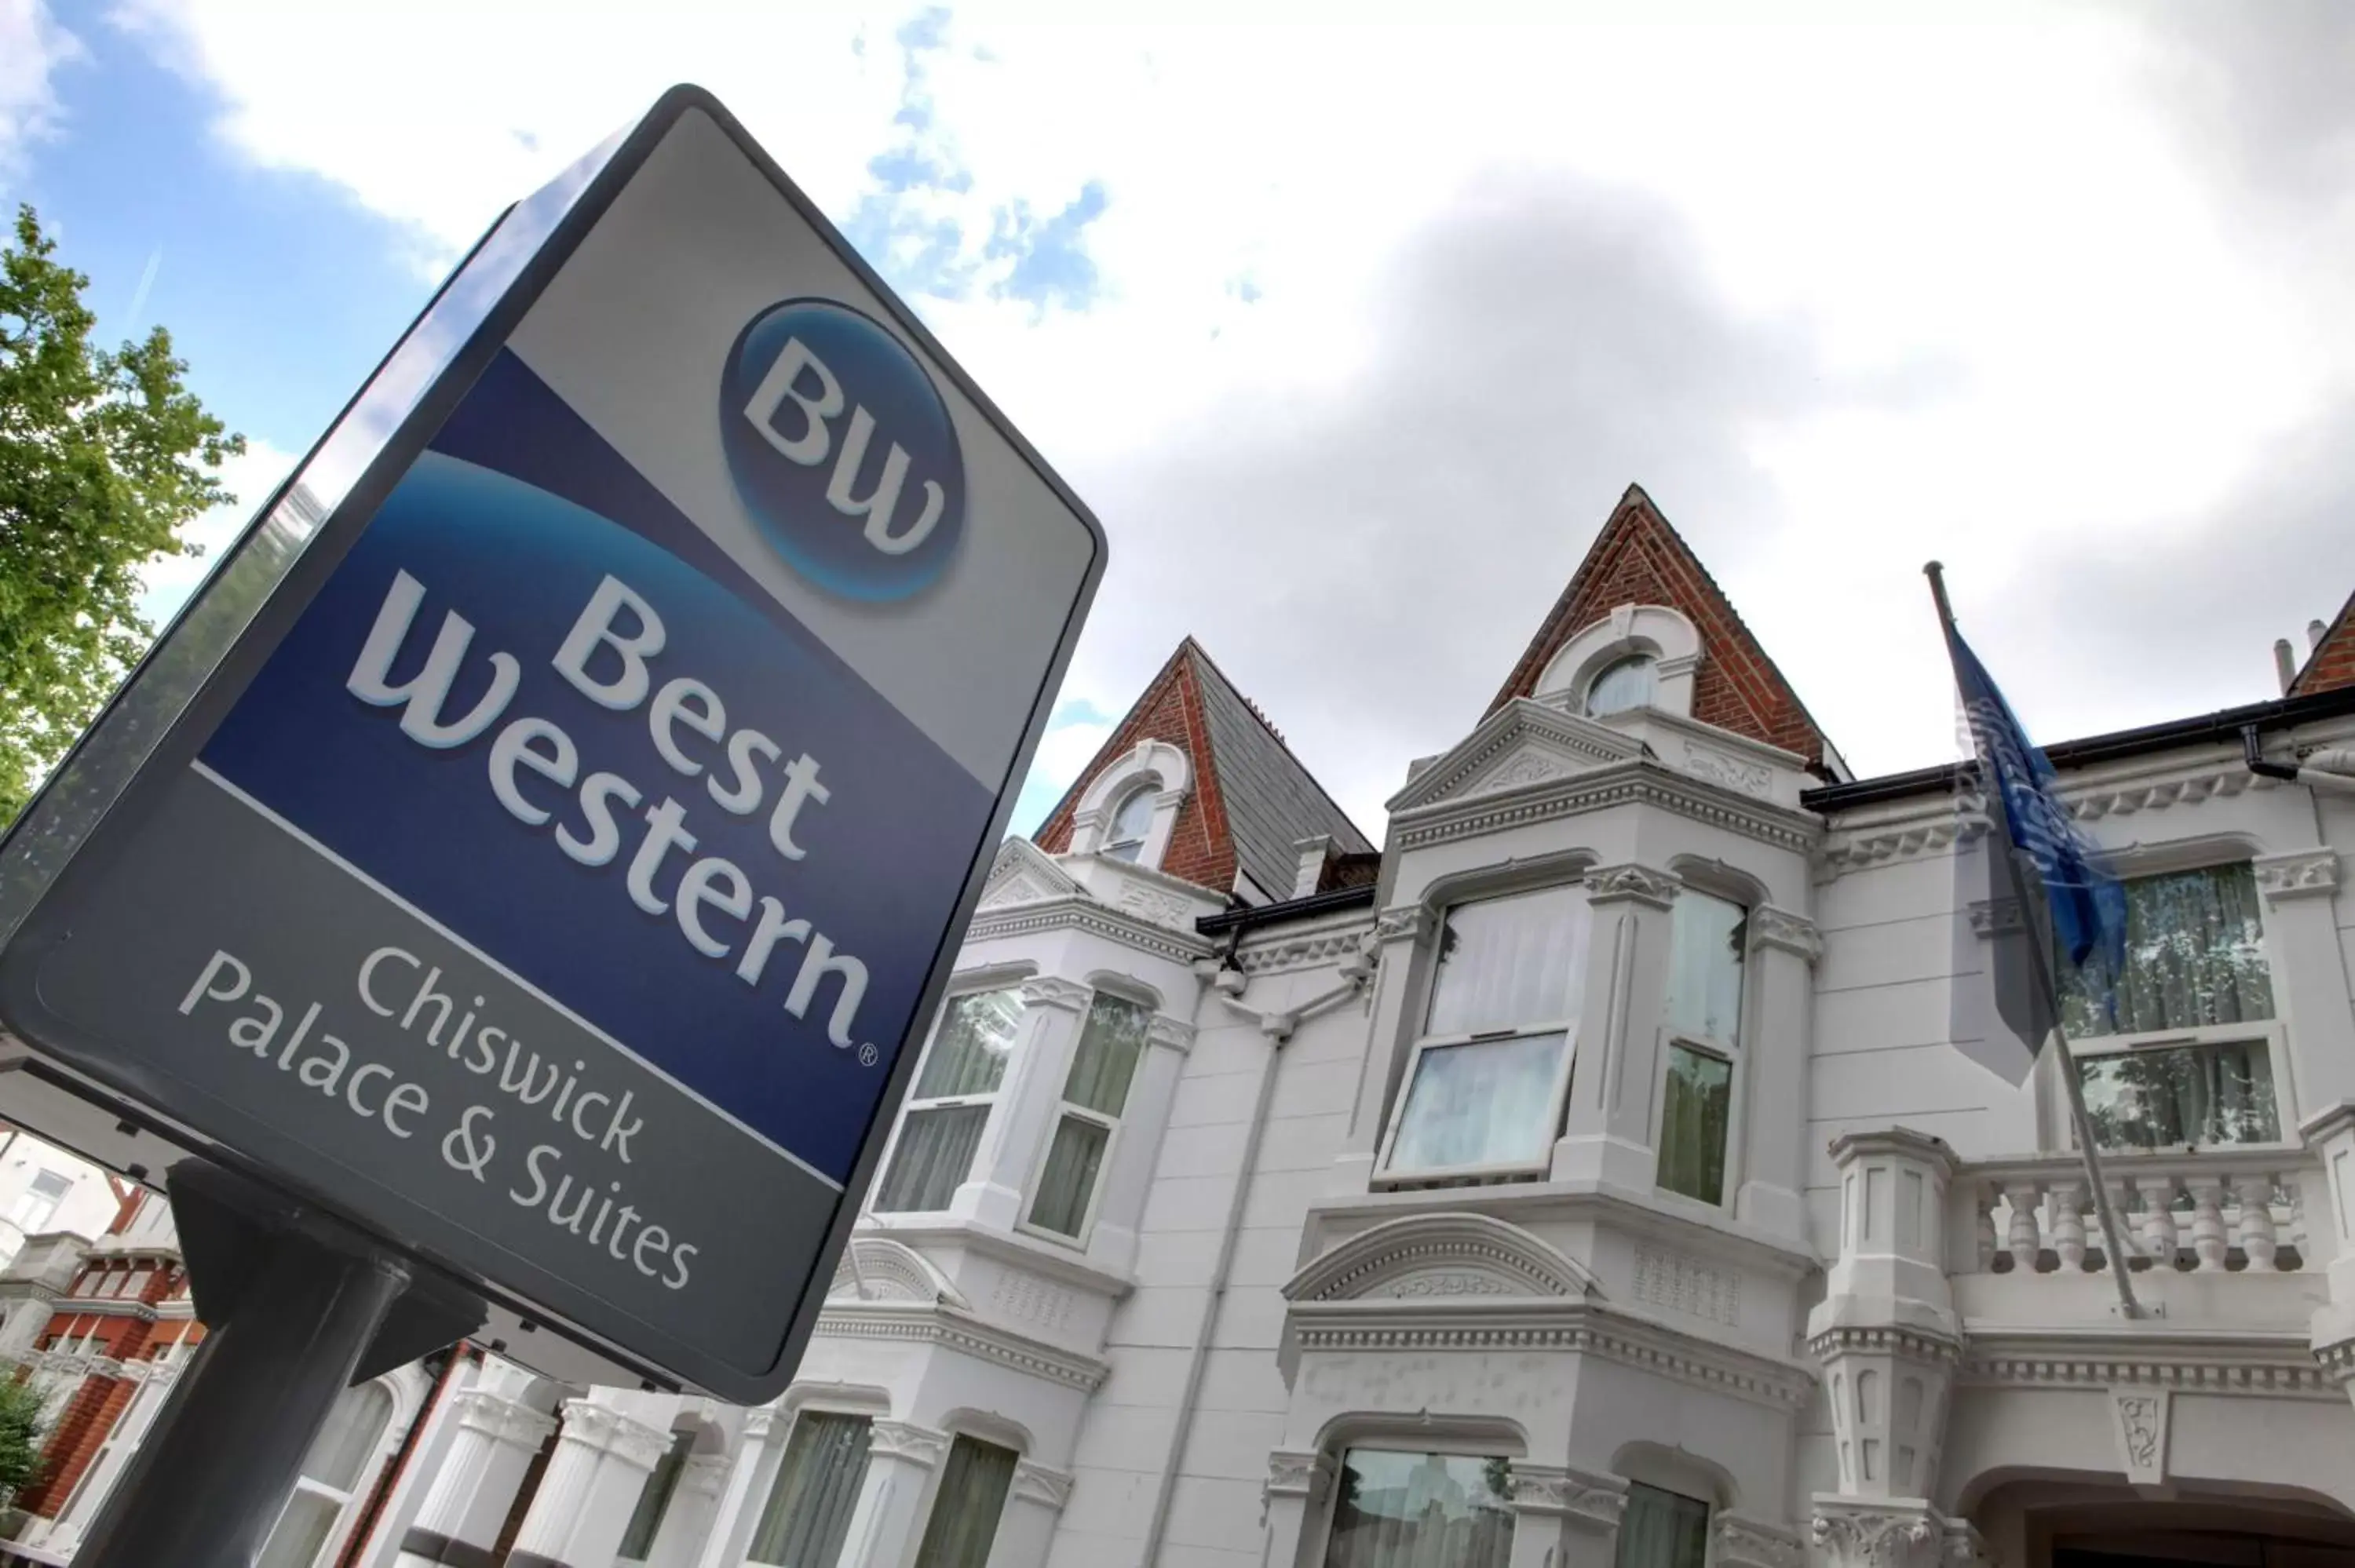 Property building in Best Western Chiswick Palace & Suites London